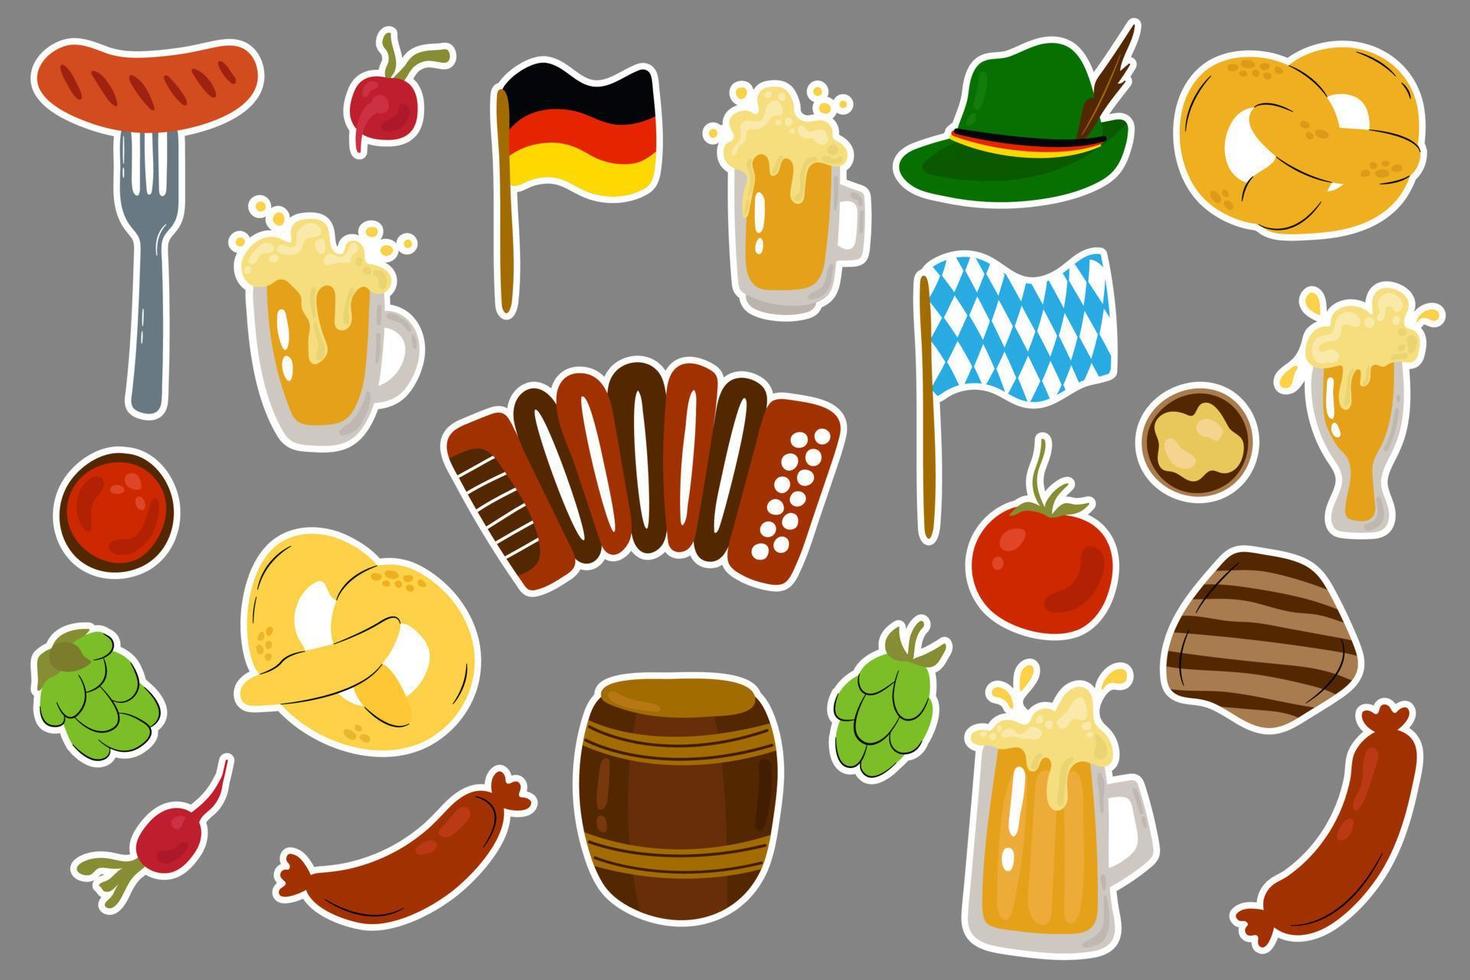 Hand drawn set of stickers for Oktoberfest. Drawn style. Vector illustration.